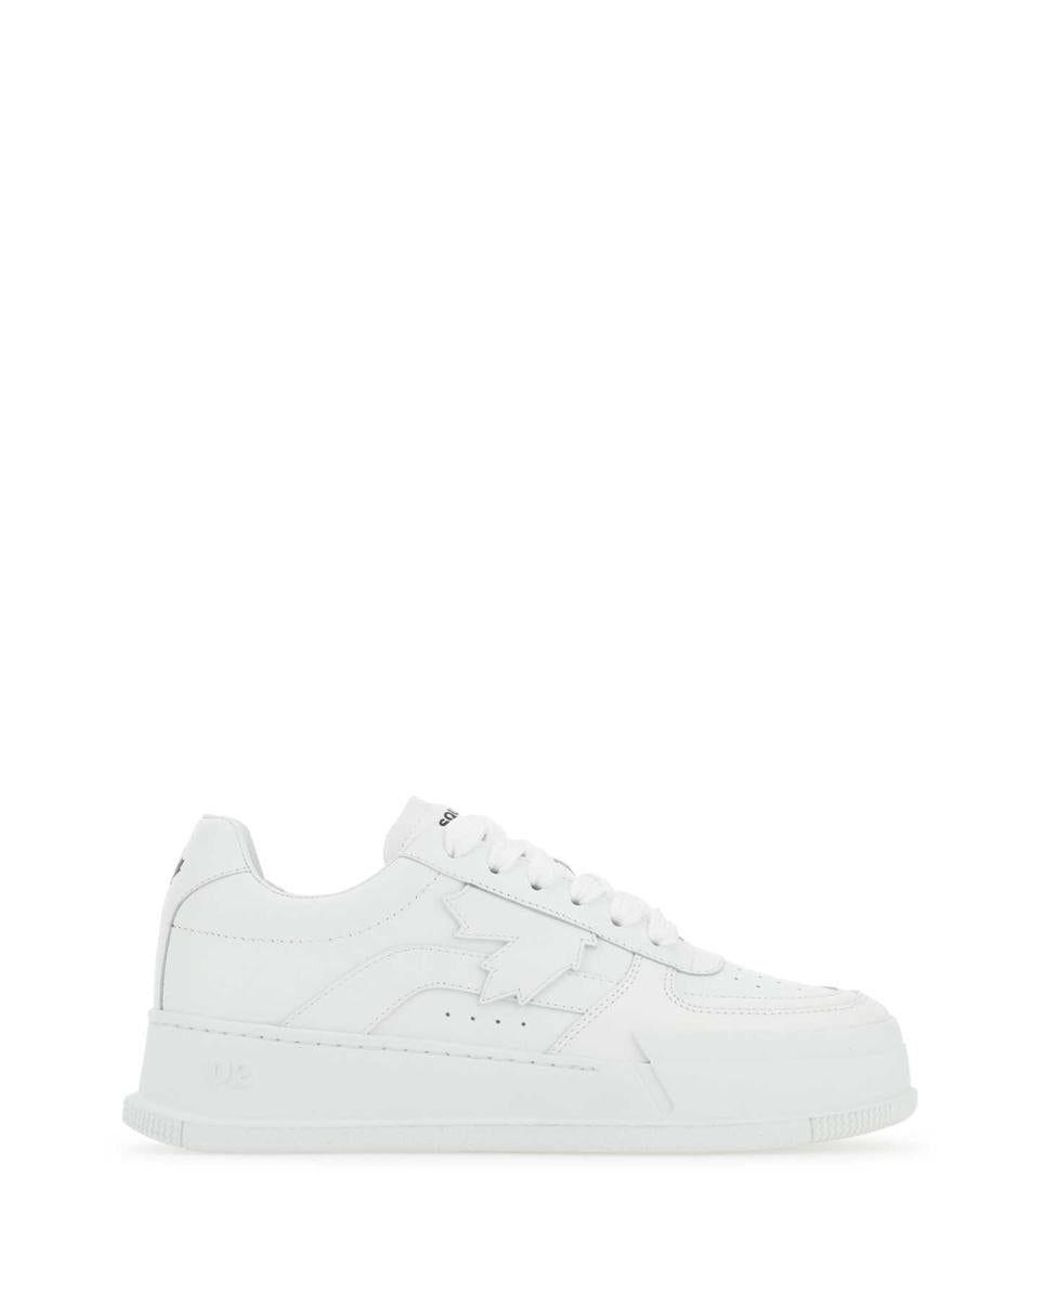 DSquared² Dsquared Sneakers in White